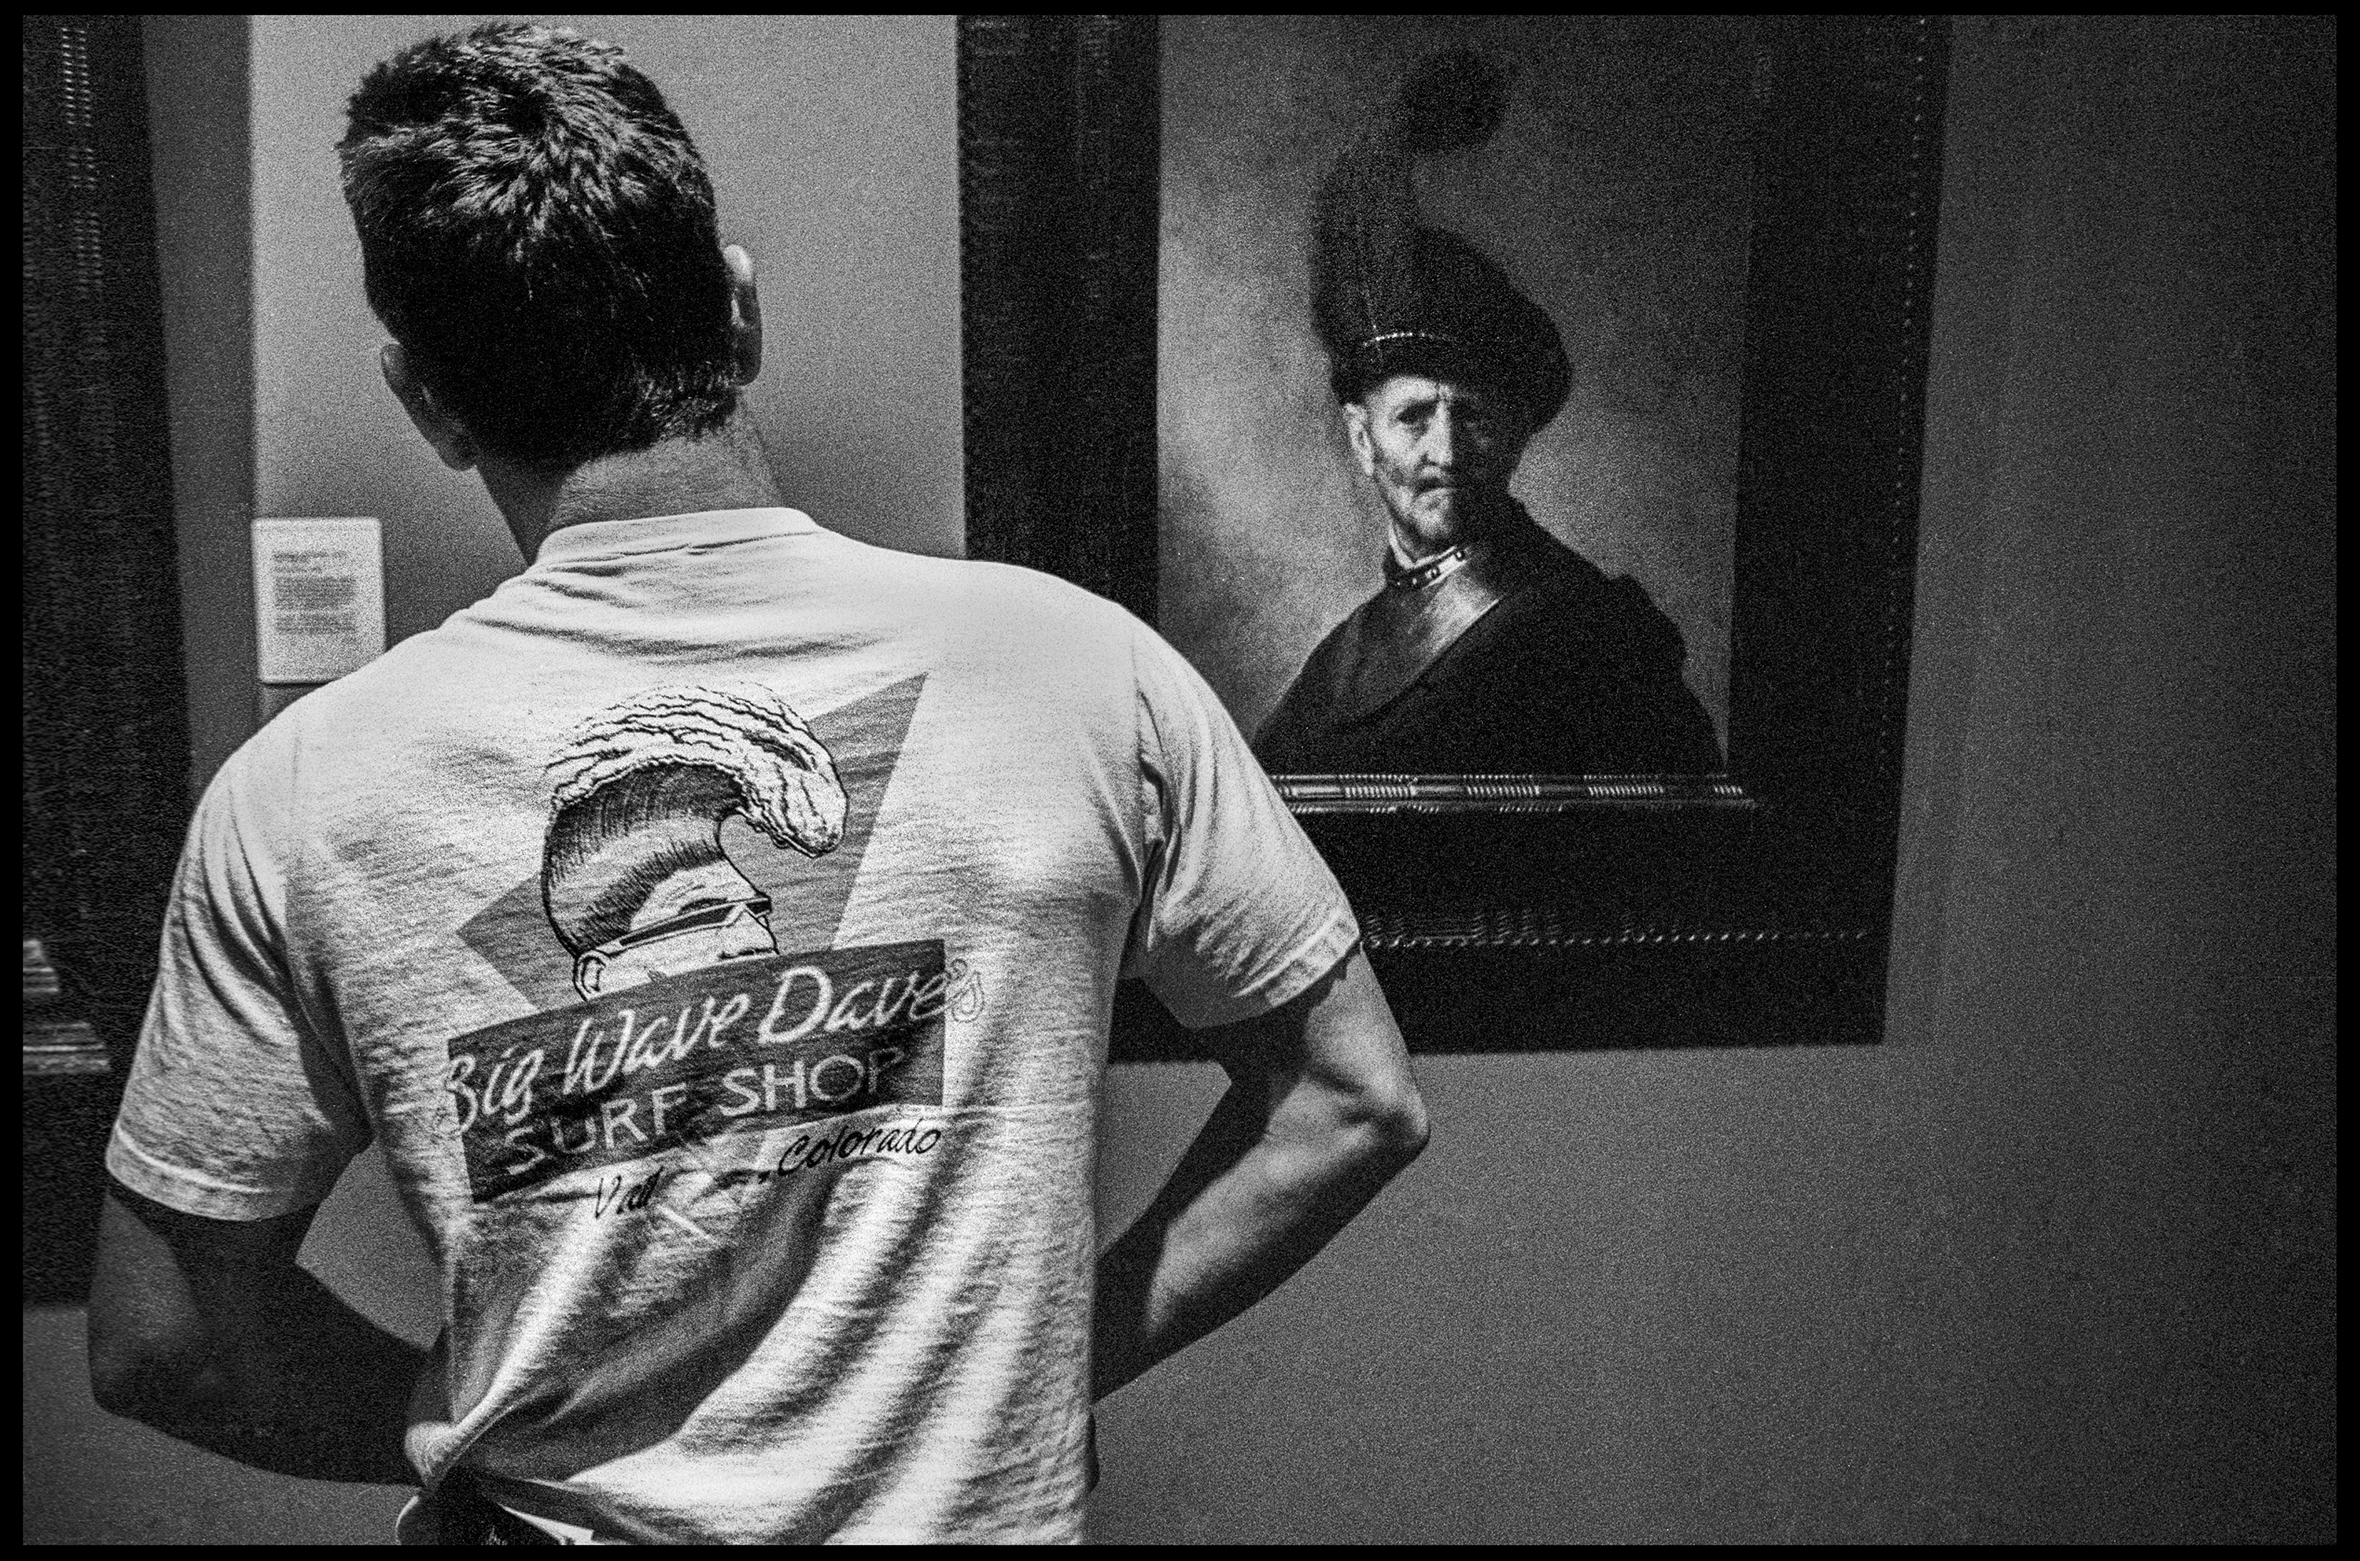 A man wearing a Big Wave Dave’s Surf Shop T-shirt is standing with his hands at his waist as he looks upon Rembrandt van Rijn’s An Old Man in Military Costume painting at a museum.